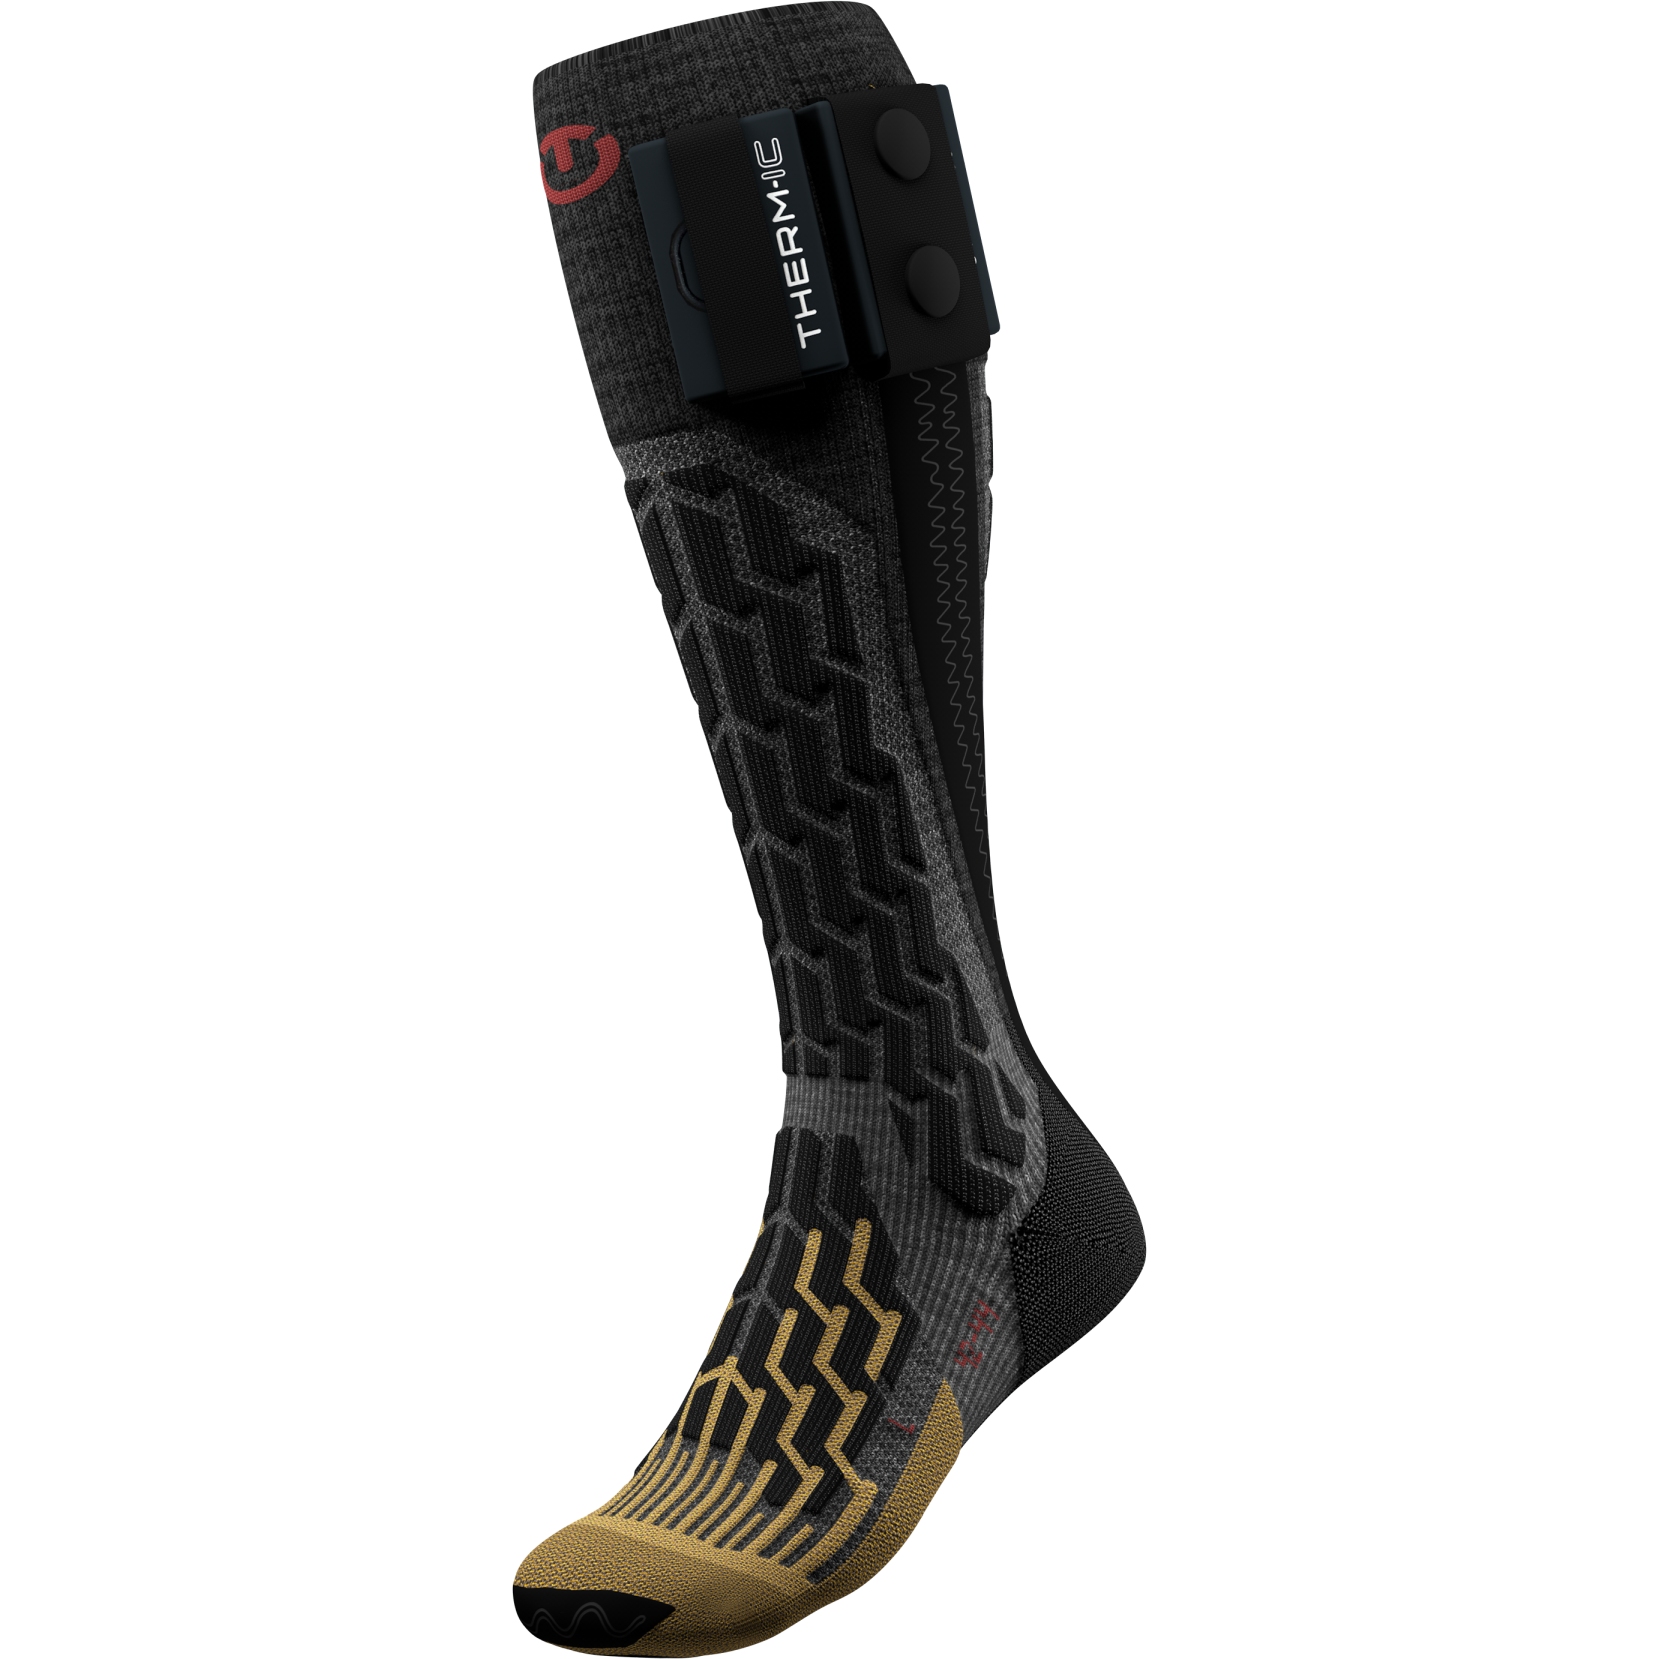 therm-ic Chaussettes Chauffantes - Powersock Heat Fusion - noir / or -  BIKE24